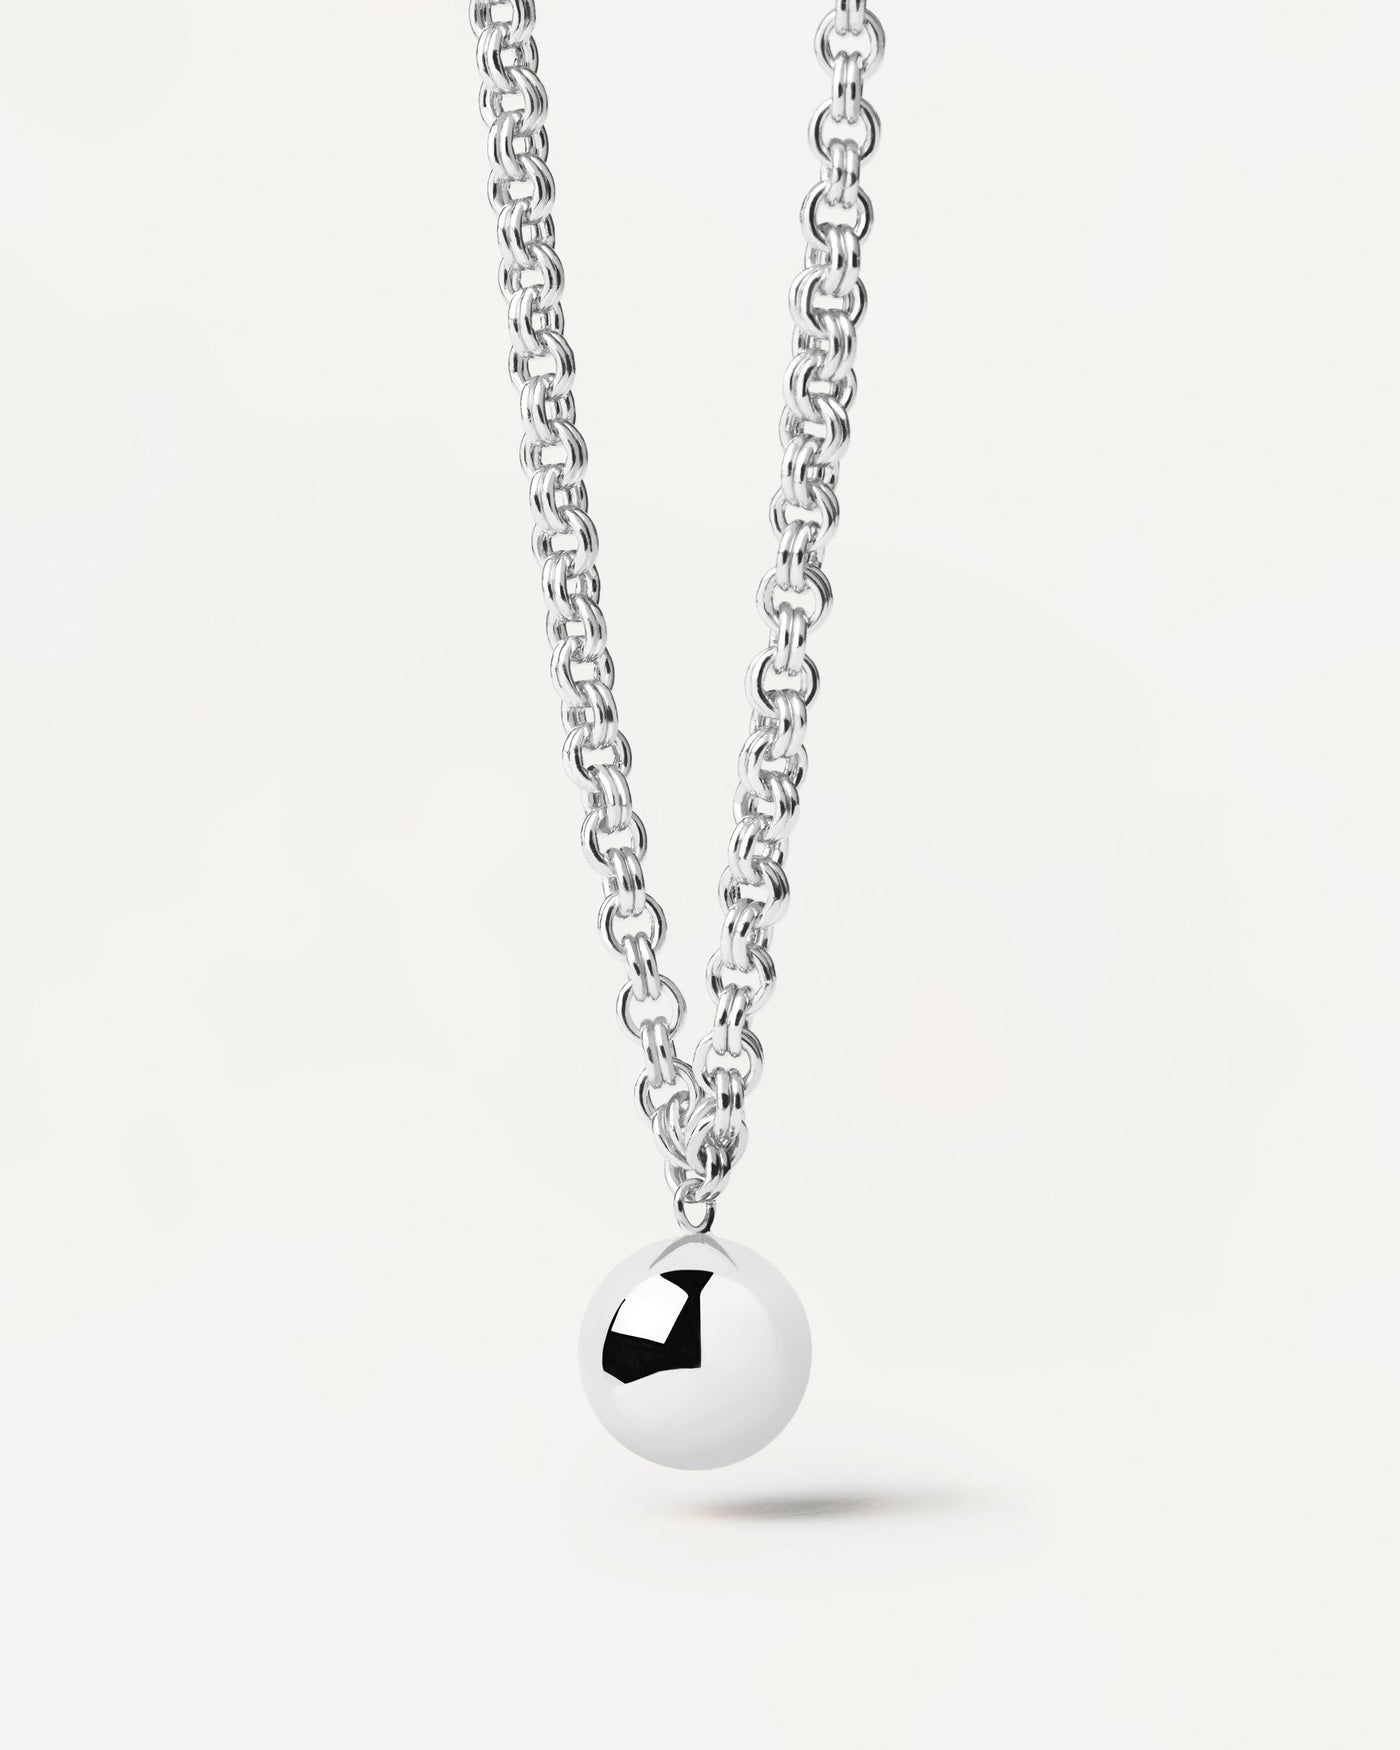 2023 Selection | Super Future Silver Necklace. Sterling Silver chain necklace with a hanging ball pendant. Get the latest arrival from PDPAOLA. Place your order safely and get this Best Seller. Free Shipping.